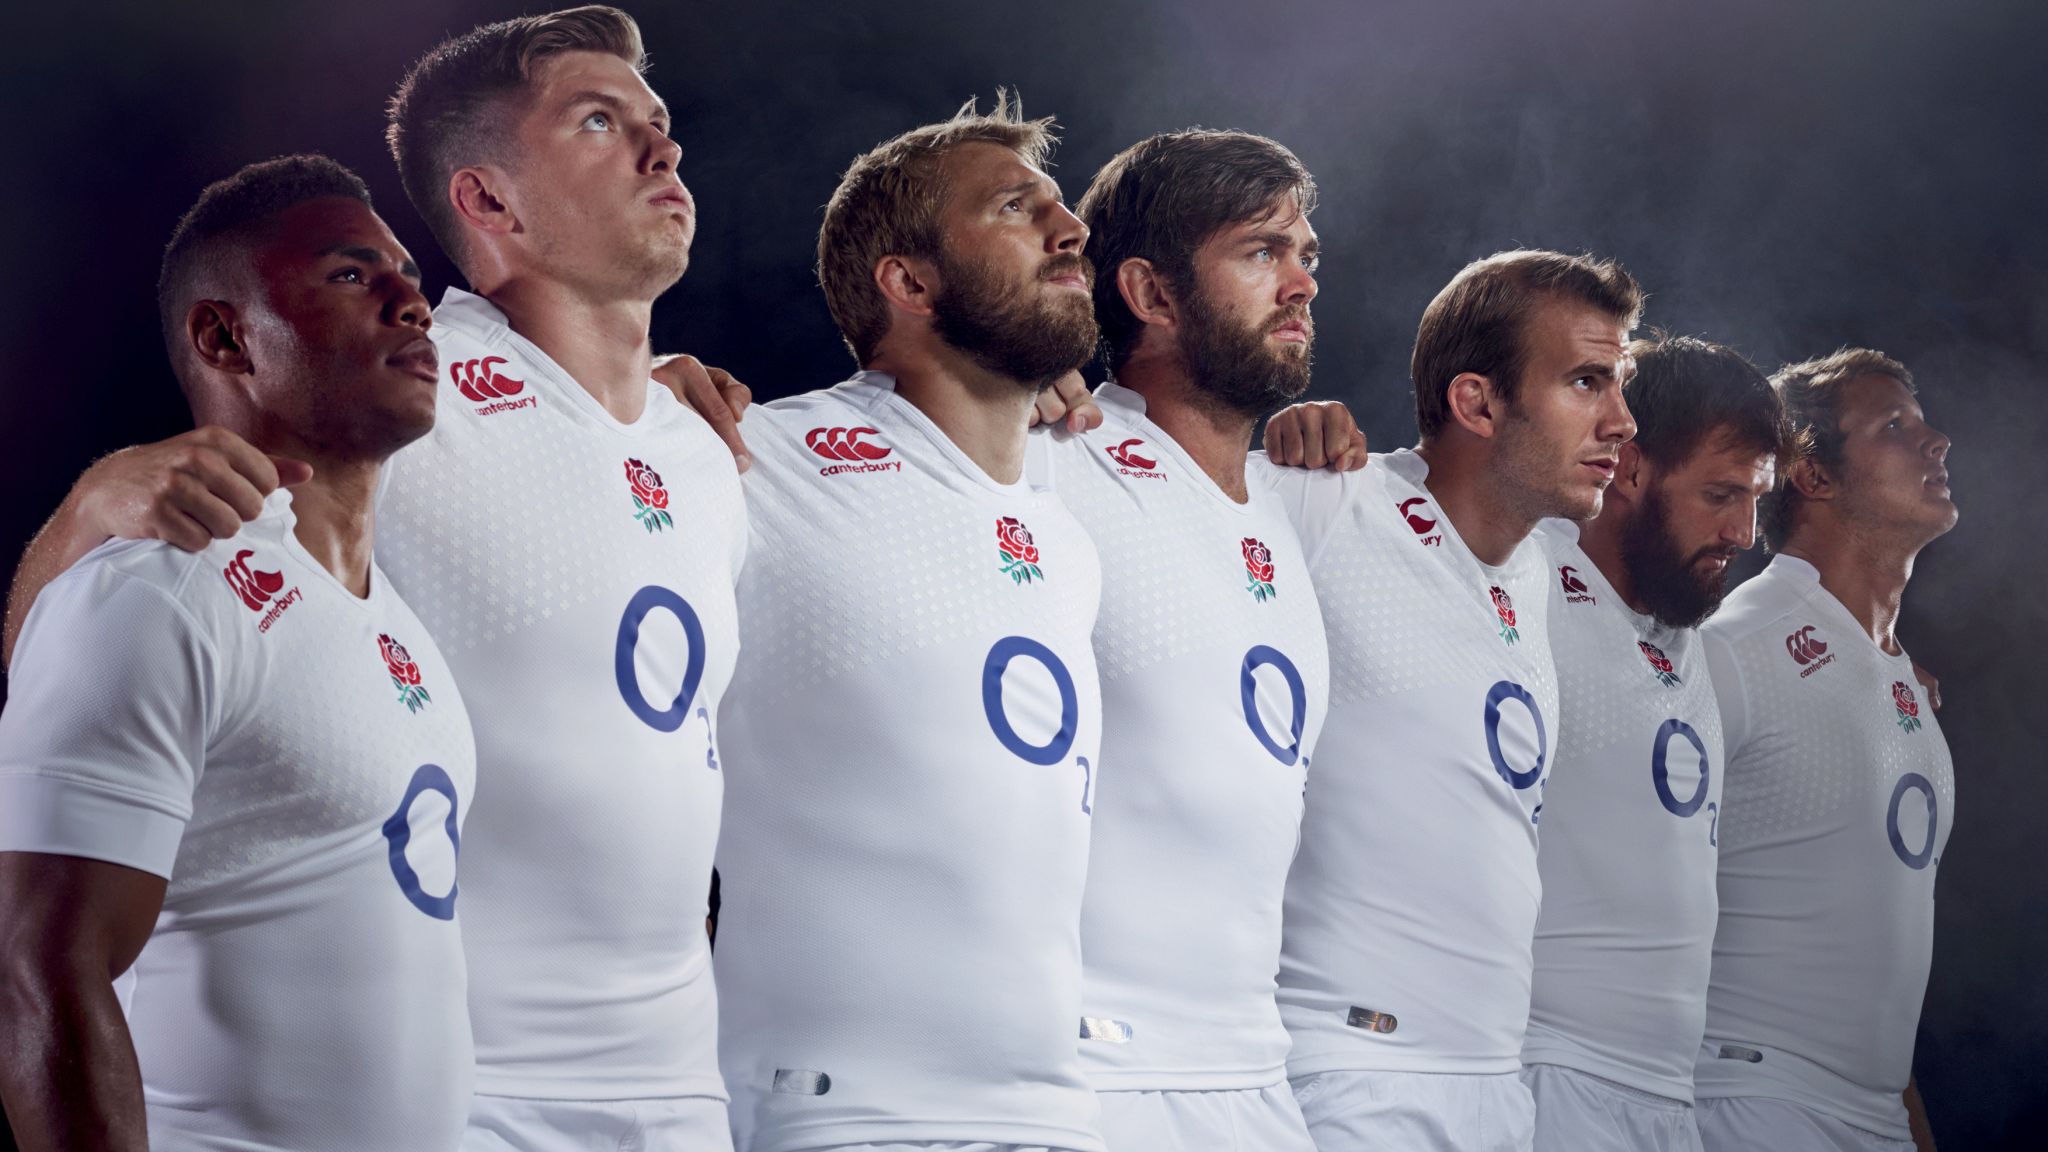 Victoria Cross and George Cross Association back new England rugby shirt Rugby Union News Sky Sports